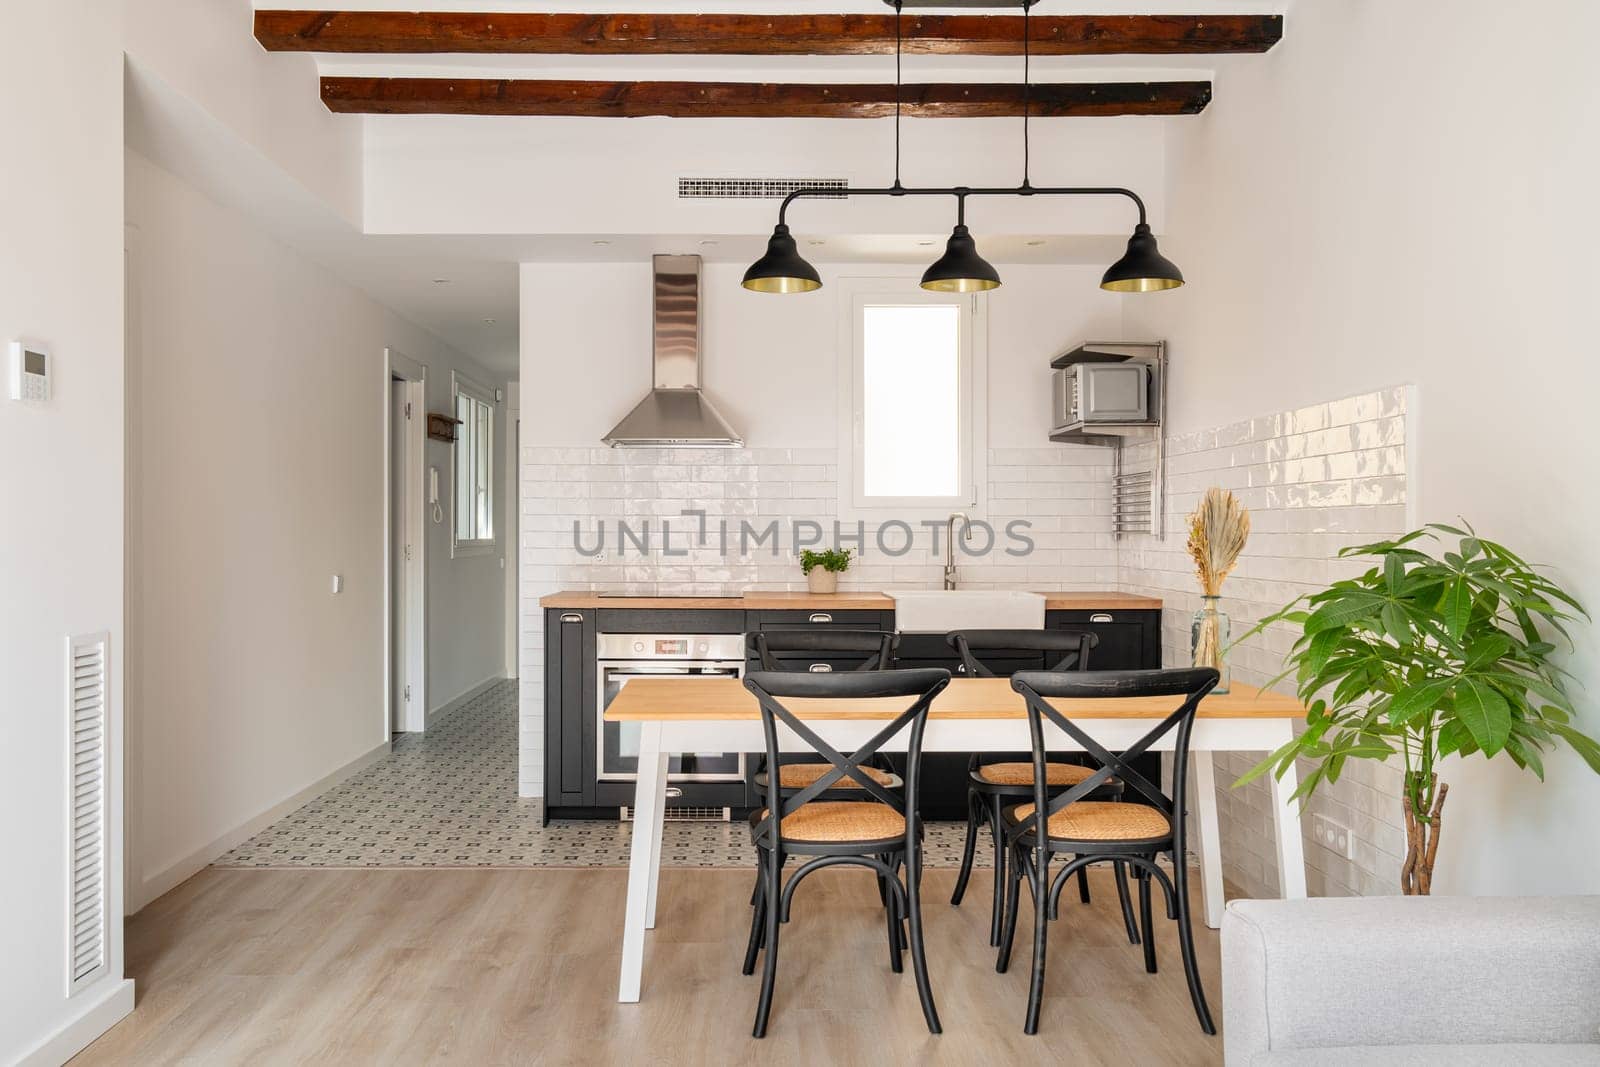 Minimalist kitchen zone with table and appliances in studio apartment. Area for cooking and dining with stylish furniture and equipment at home